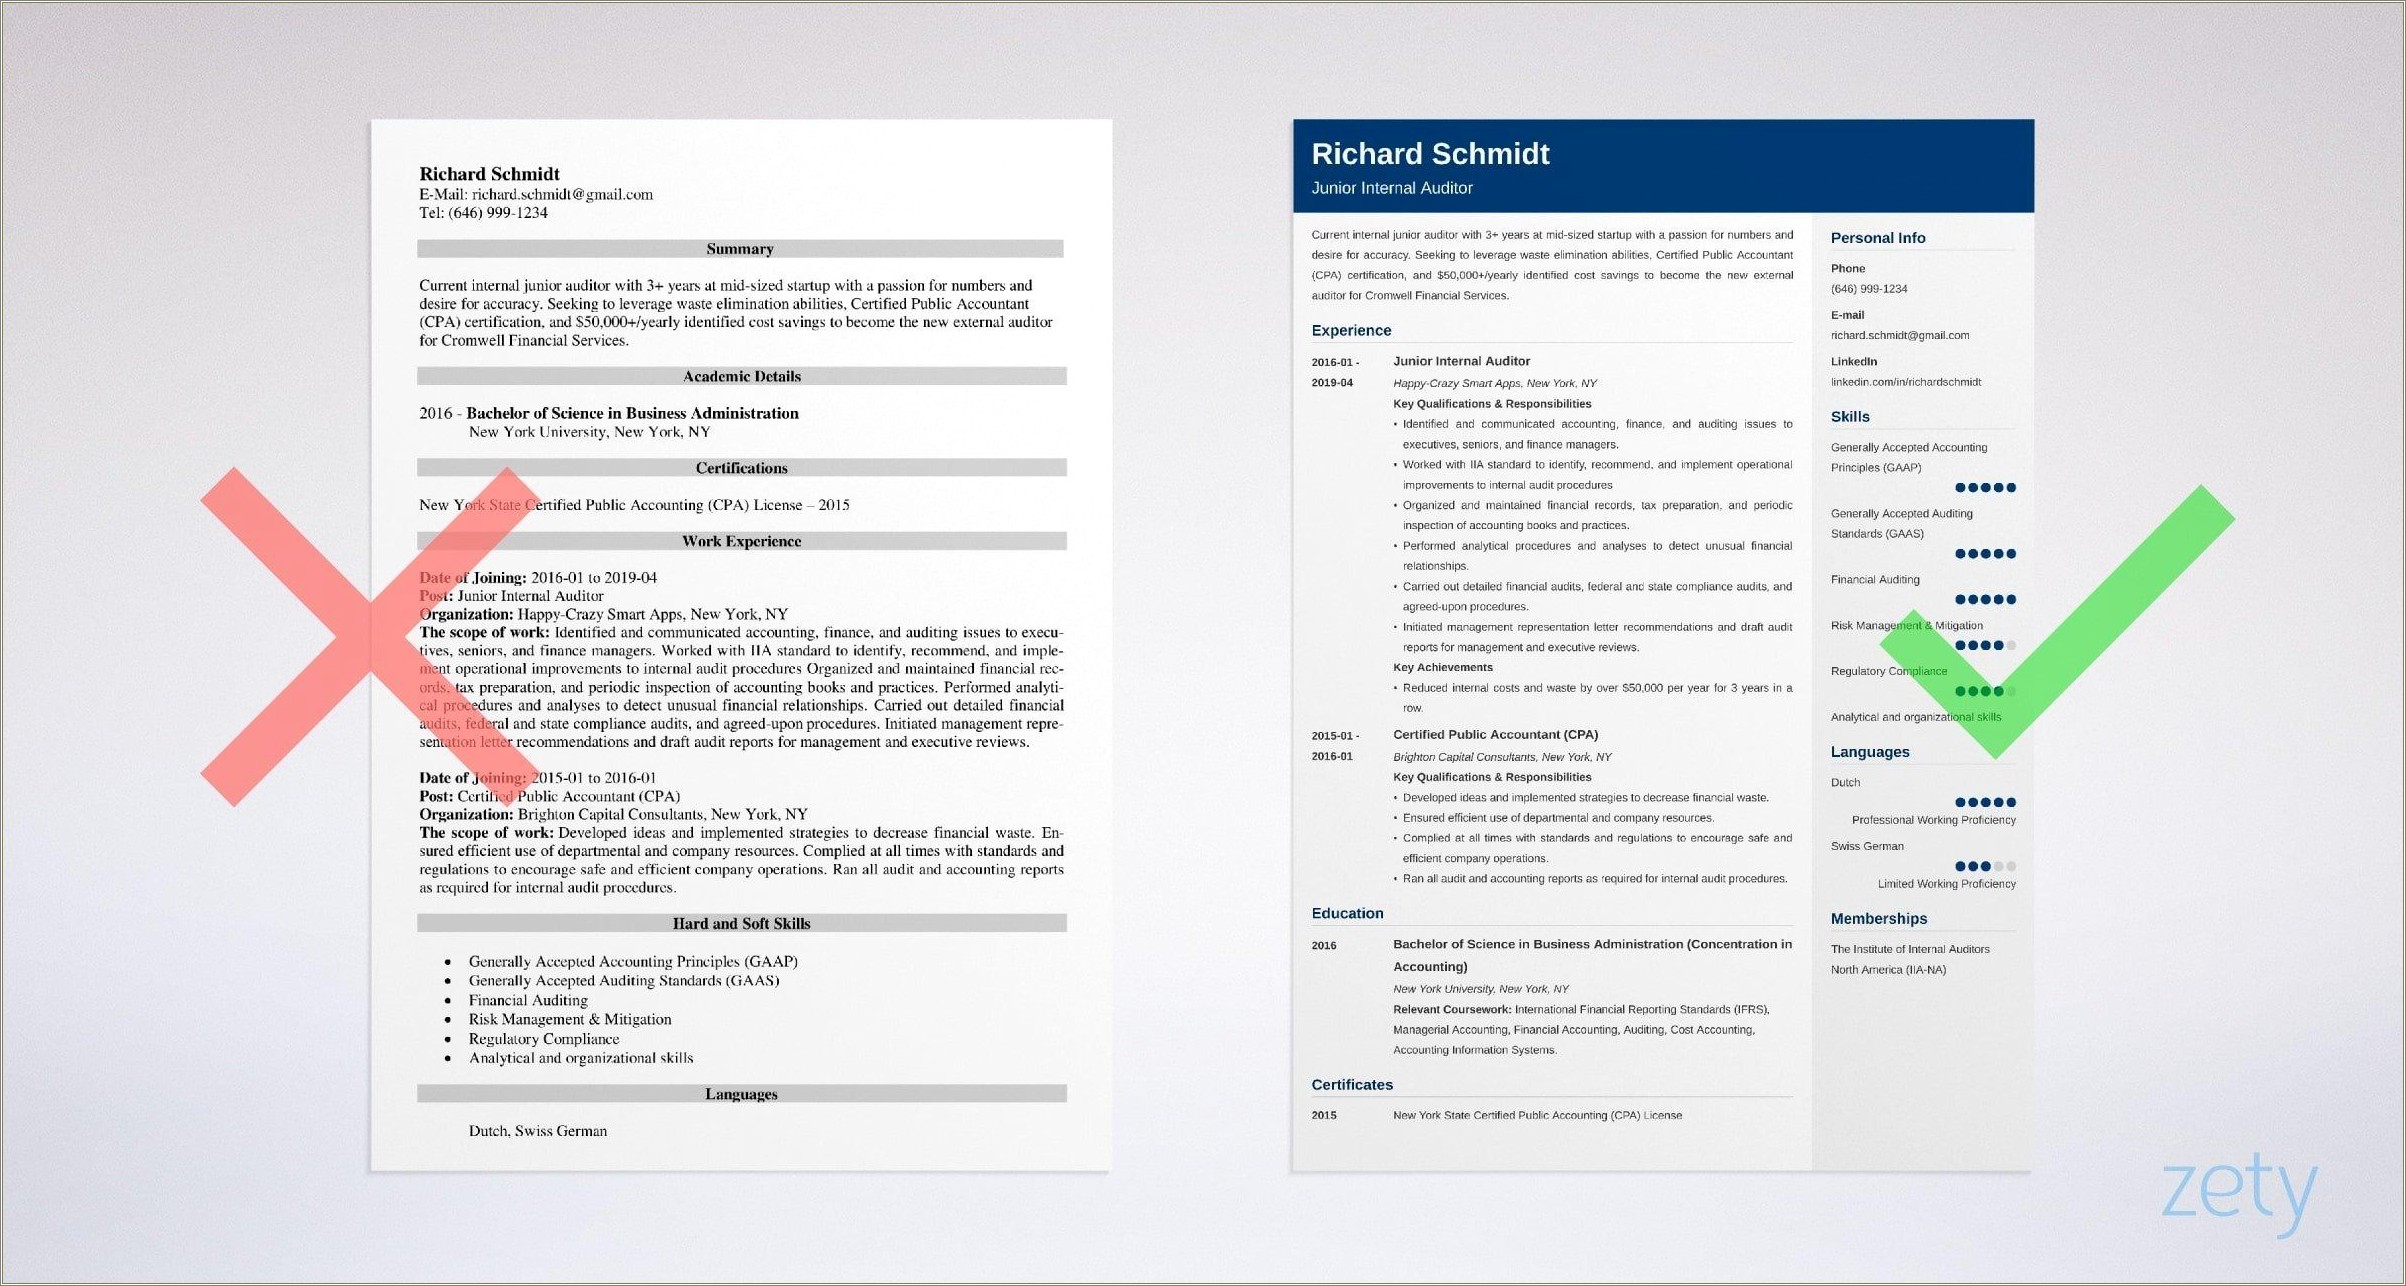 Resume Summary For A Audit Appeals Specialist